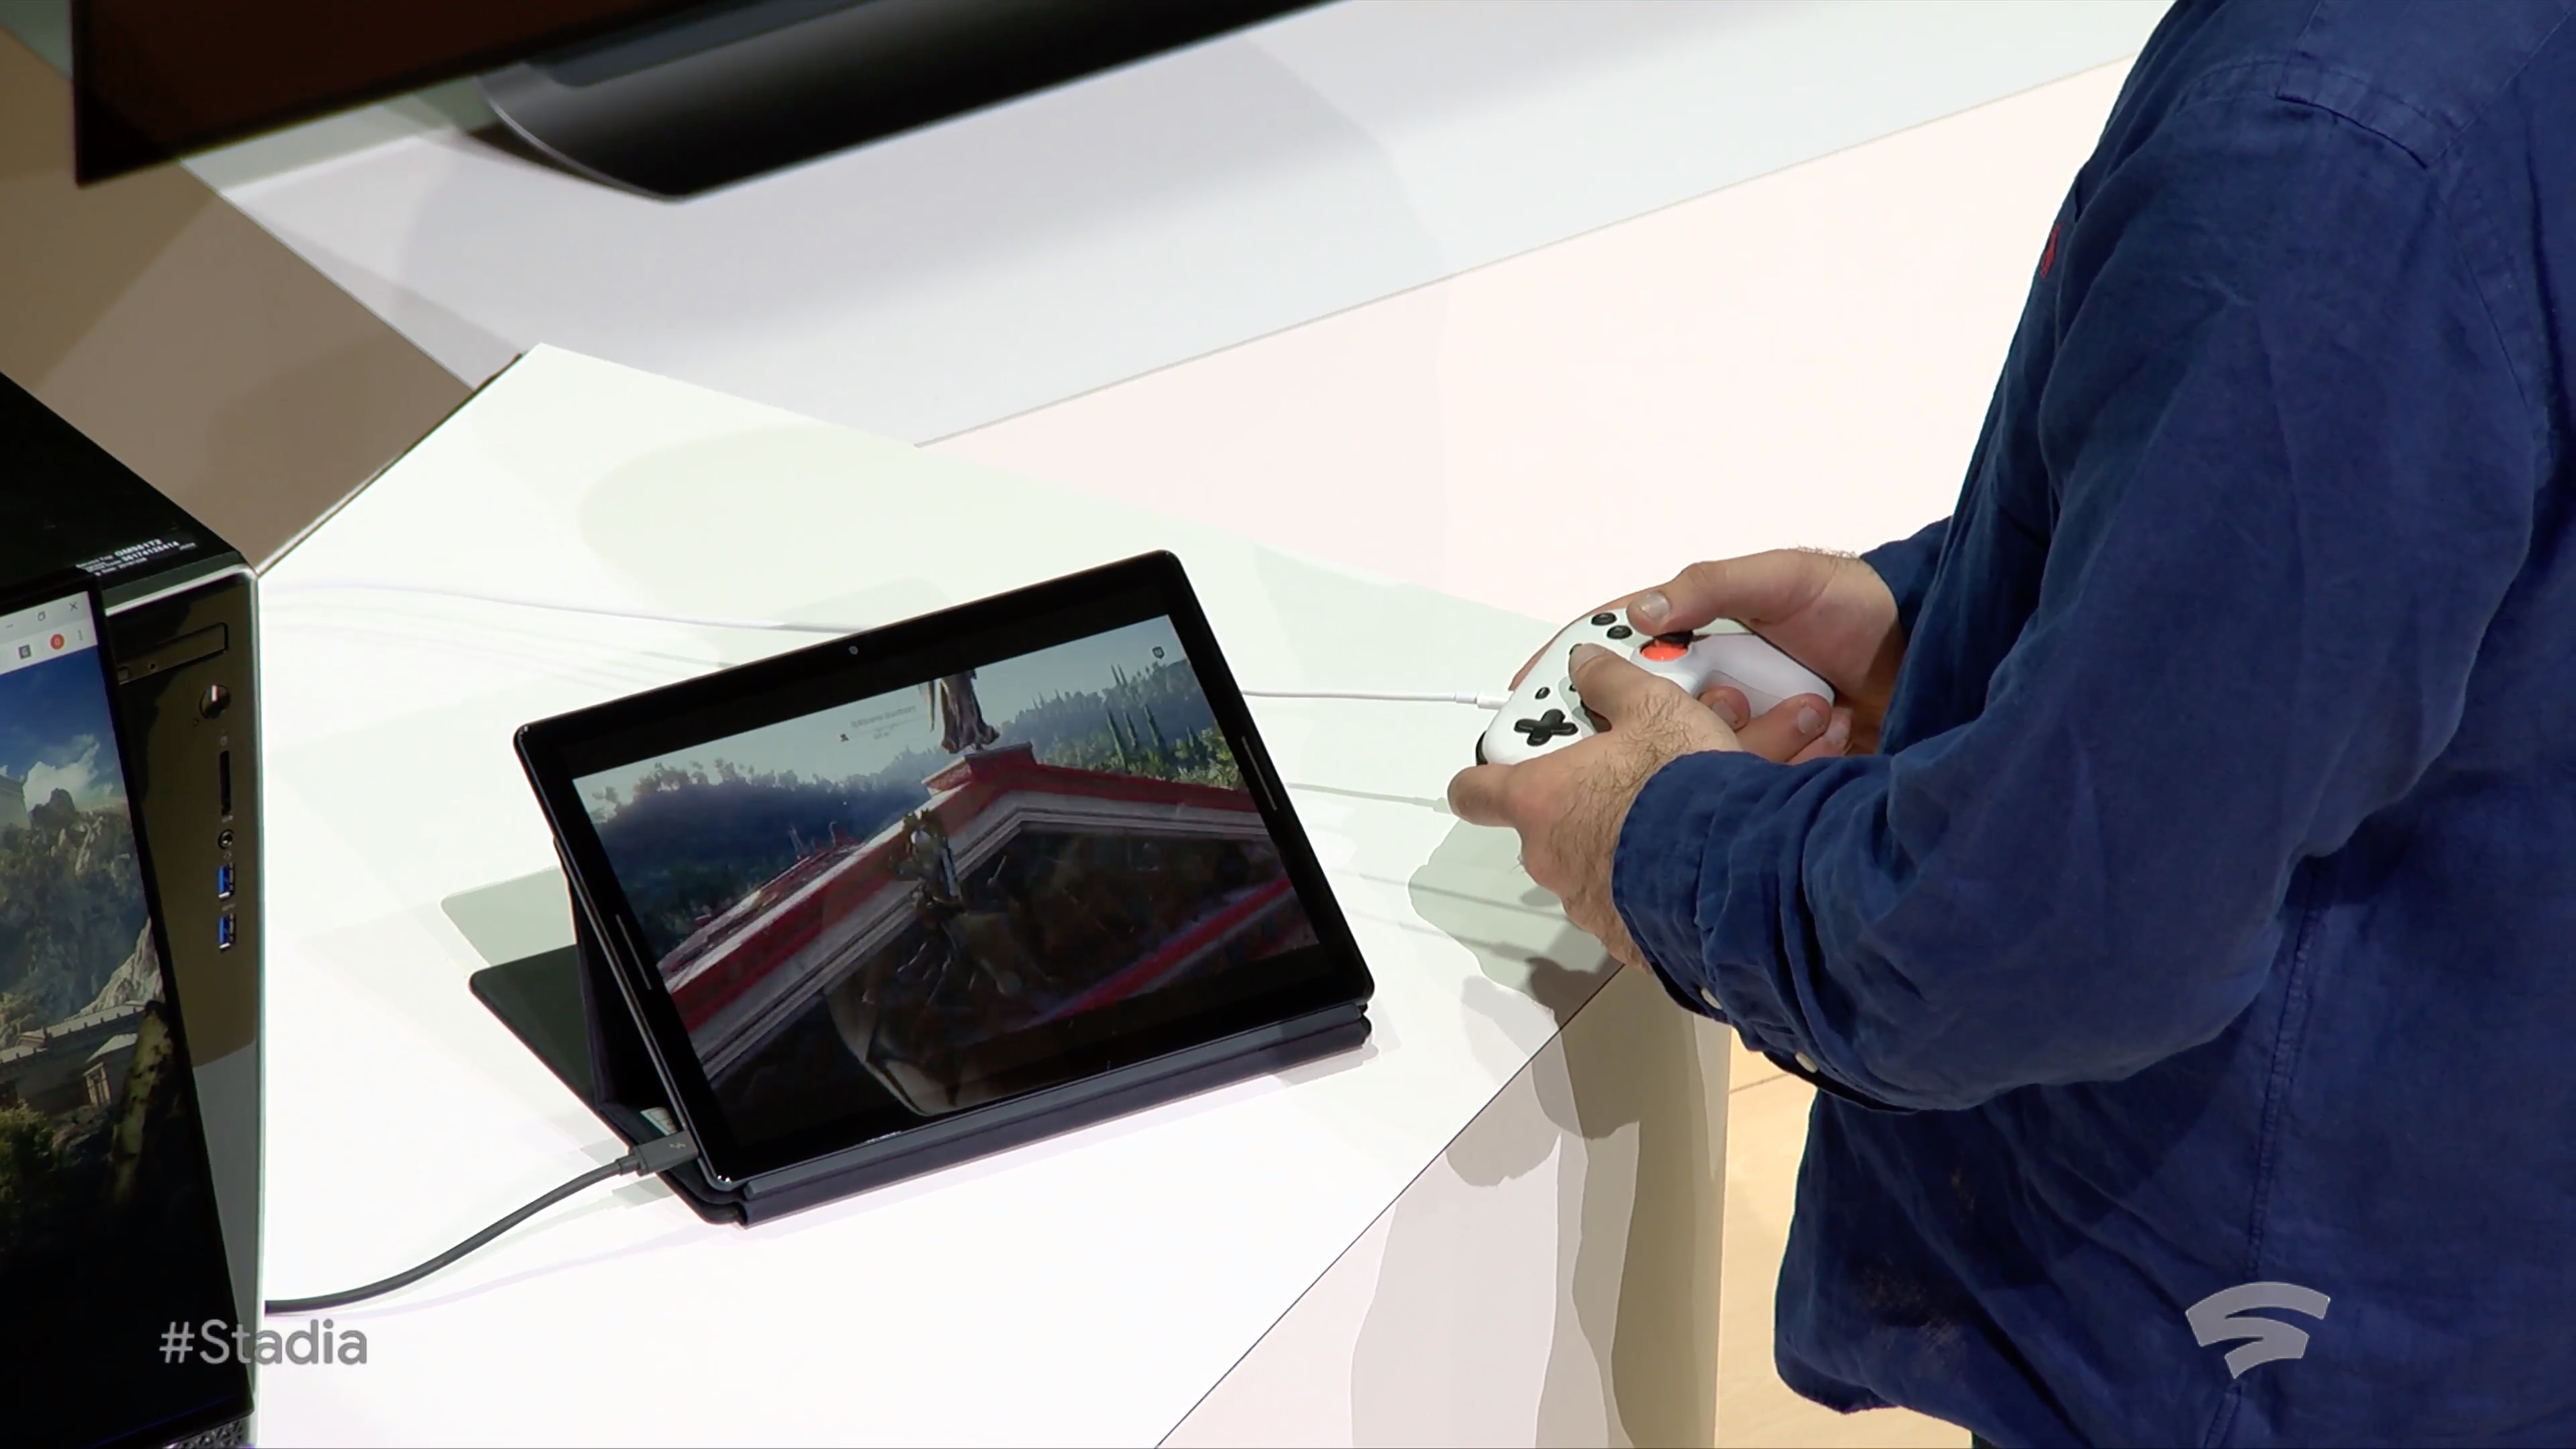 Google Stadia Subscriptions: Is The $9.99/Month Stadia Pro Subscription Worth It Or You’d Rather Stick To The Free Stadia Base